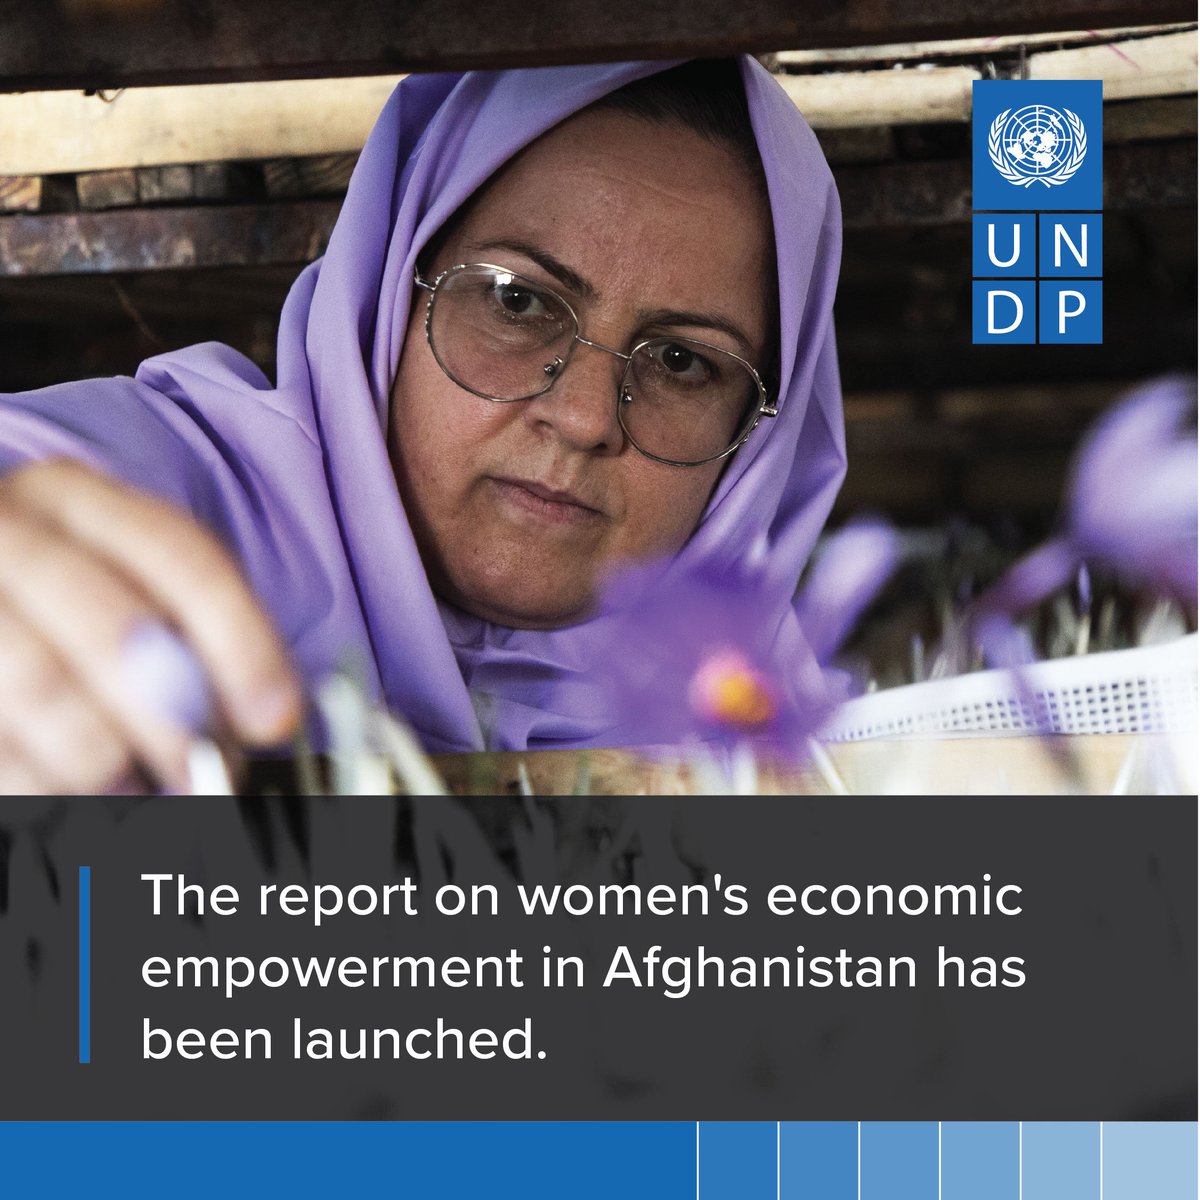 Listening to Women-led entrepreneurs in Afghanistan - The report on women's economic entrepreneurs in Afghanistan is now available! Discover how the women-for-women approach is making a difference. Check out the report here: go.undp.org/ZkD